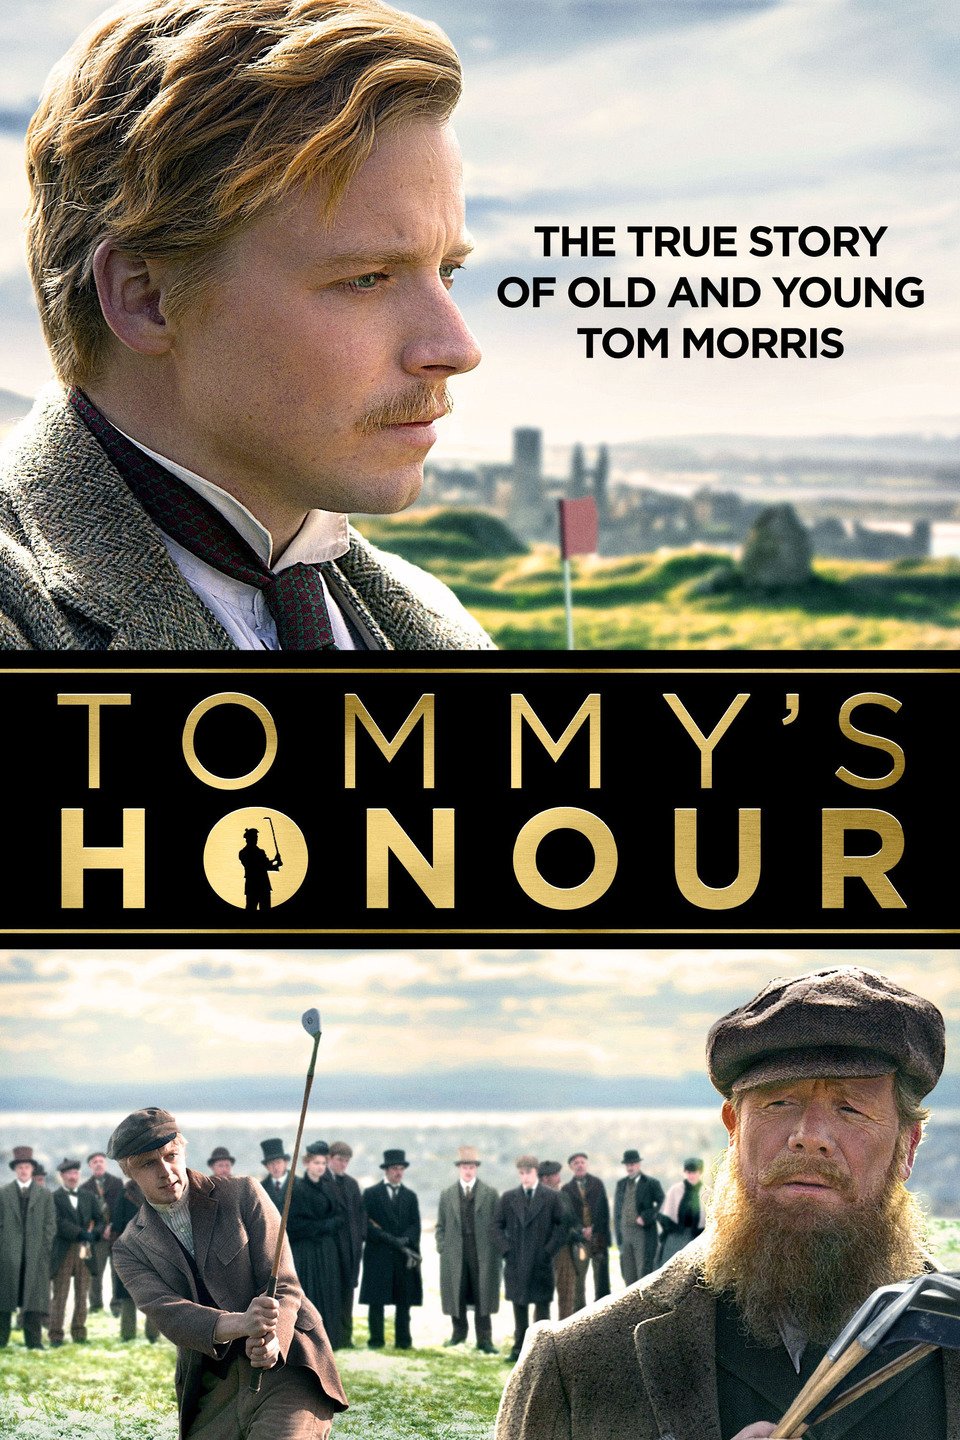 Tommy S Honour Trailer Trailers Videos Rotten Tomatoes